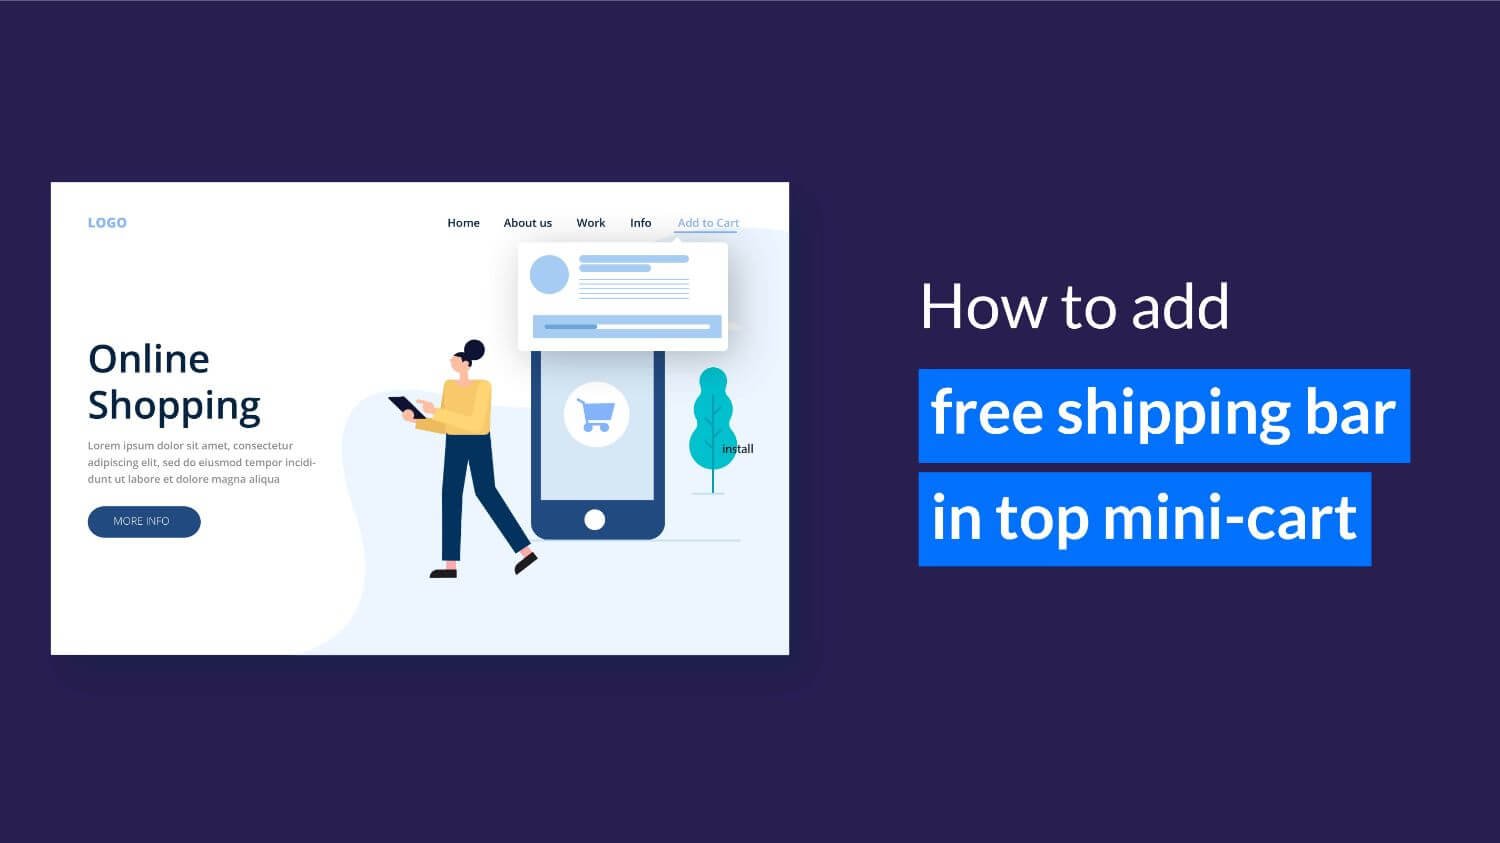 How to add a free shipping bar in the top cart in Magento title image